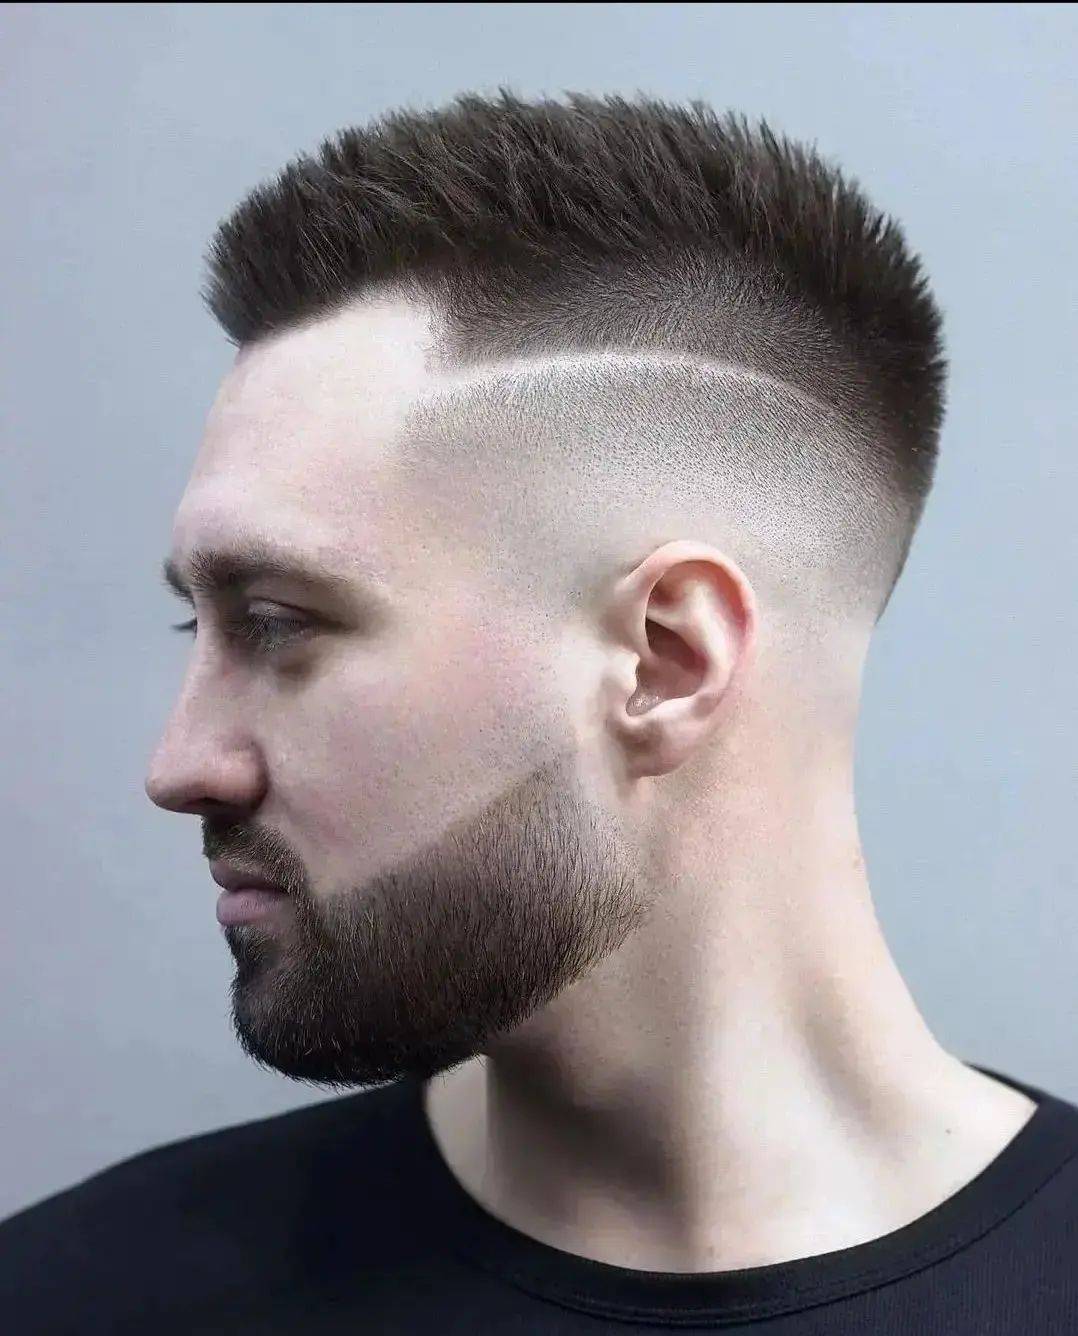 Hairstyle for Men 287 best haircut for men | haircut for men | haircuts for men Haircut for Men